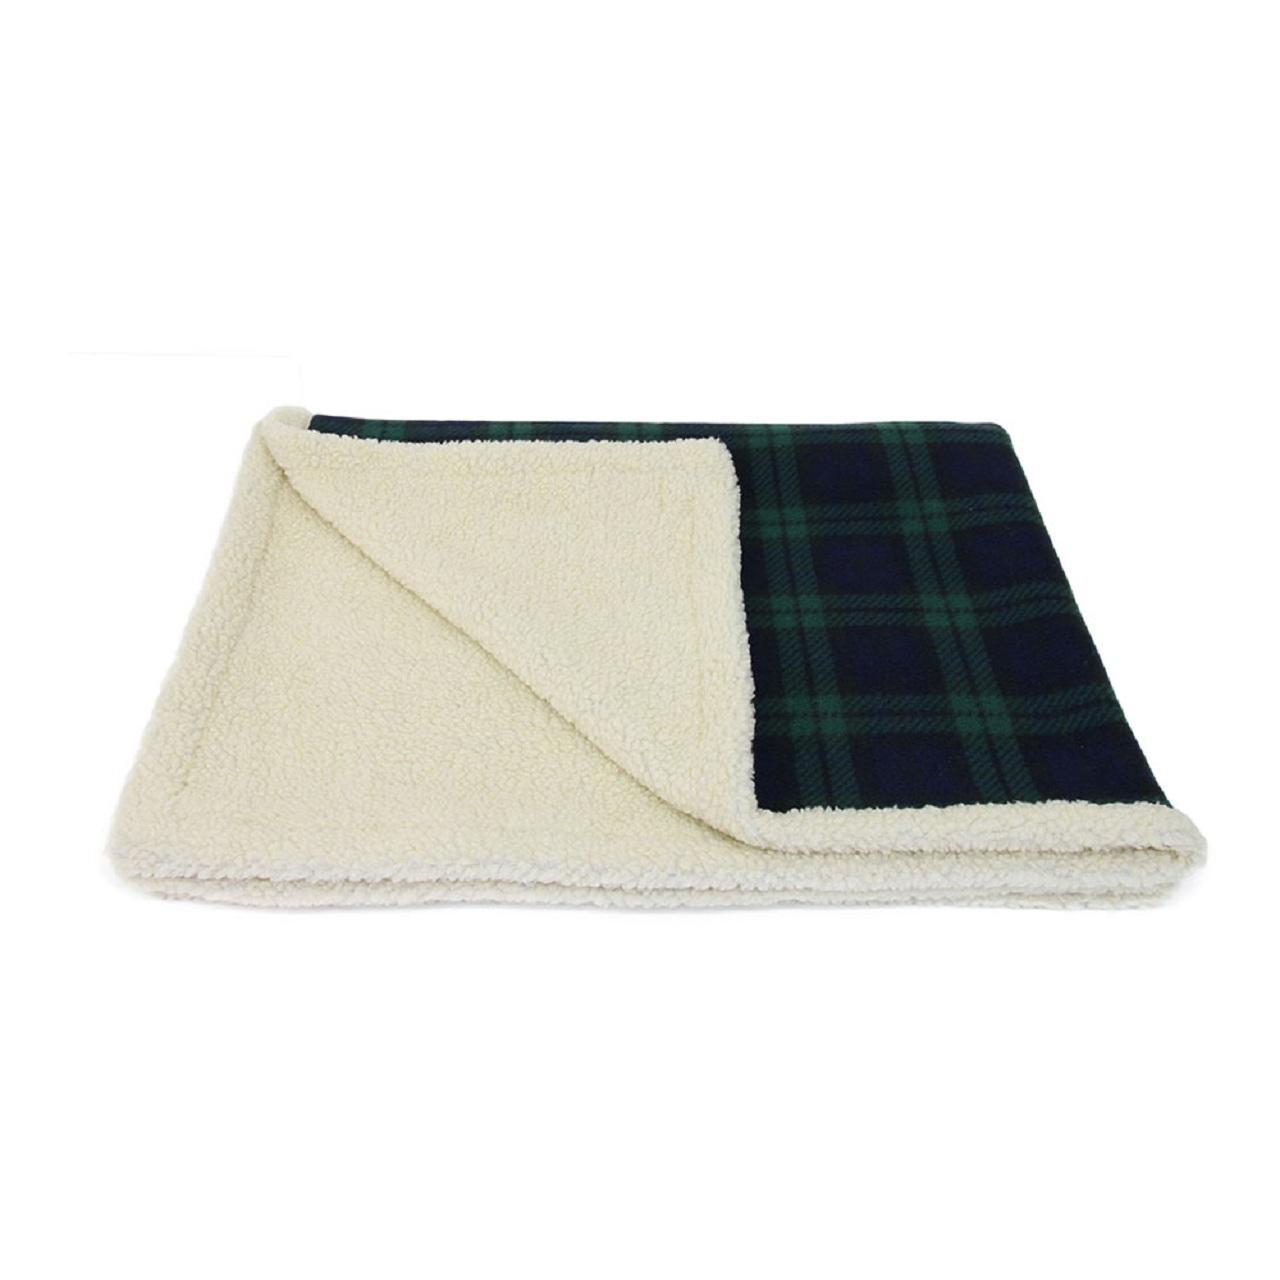 An image of Earthbound Sherpa Pet Blanket Black Watch Extra Large